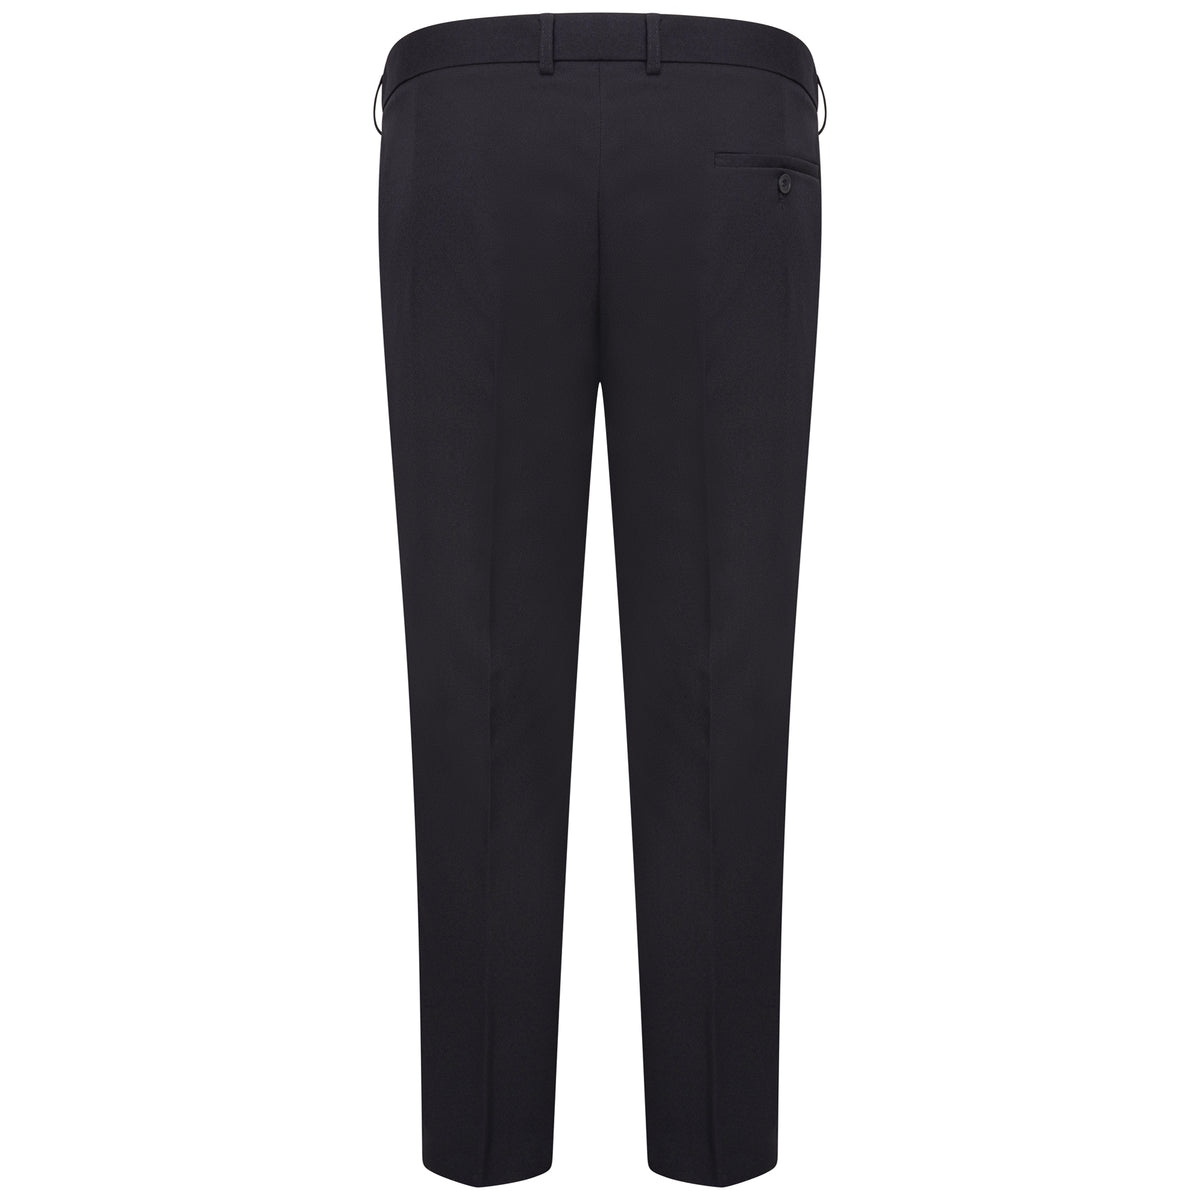 Pleated Suit Trousers - Grey Flannel | Men's Trousers | Oliver Brown, London